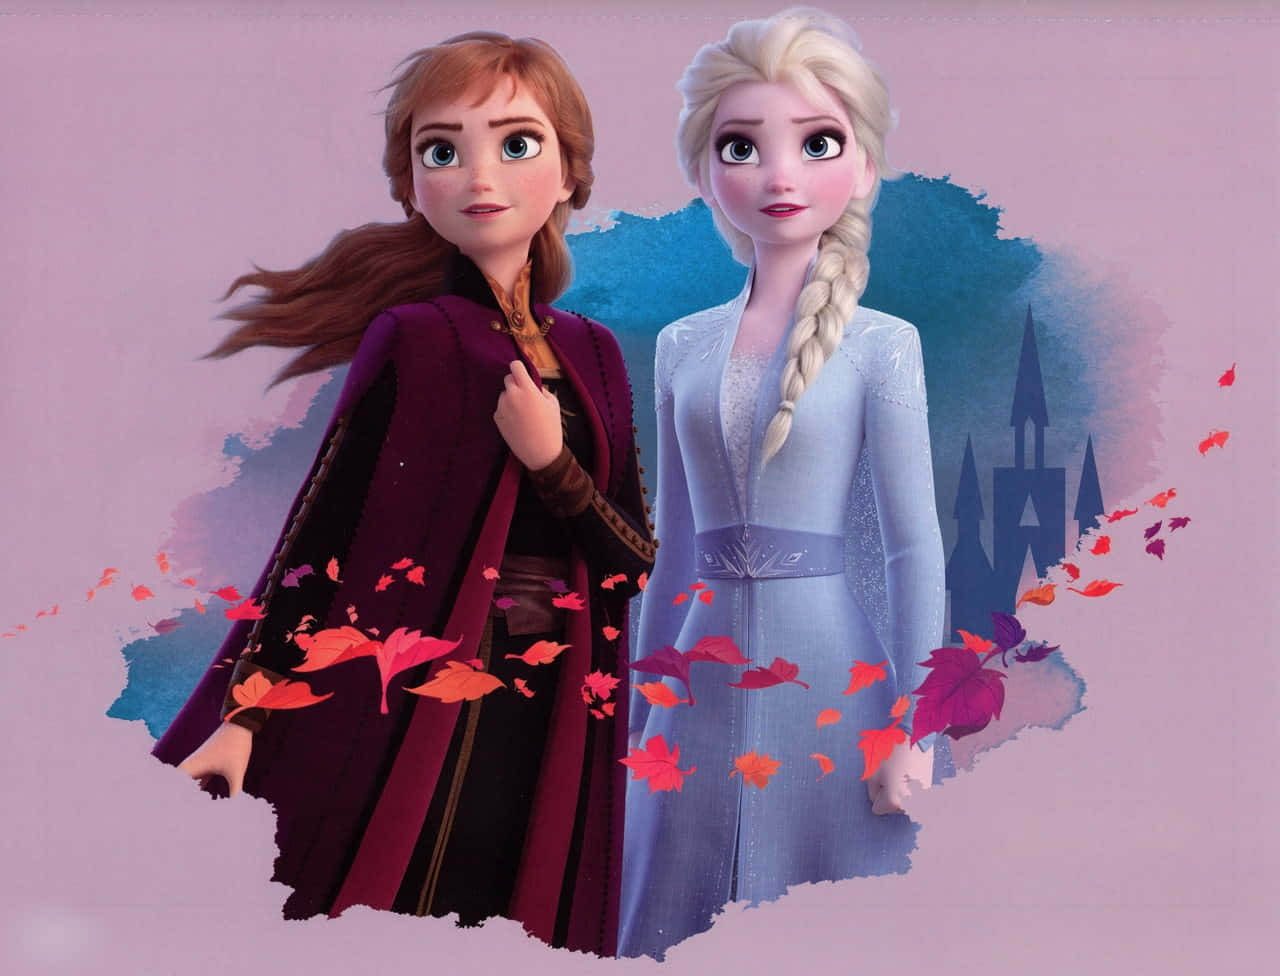 Sisters and Best Friends - Elsa and Anna From Disney's Frozen